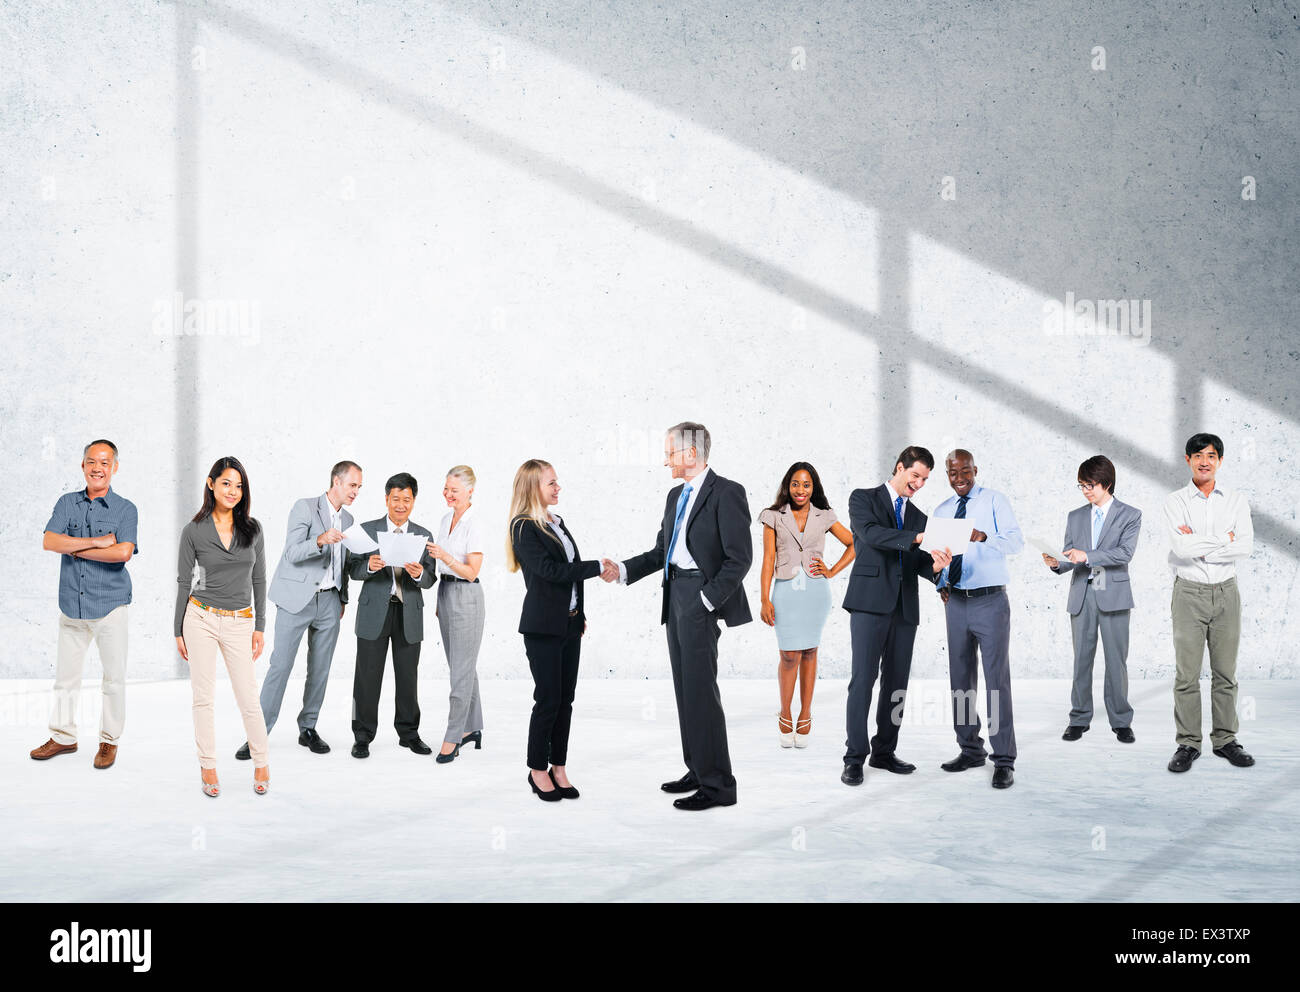 Business People Handshake Greeting Agreement Corporate Concept Stock Photo